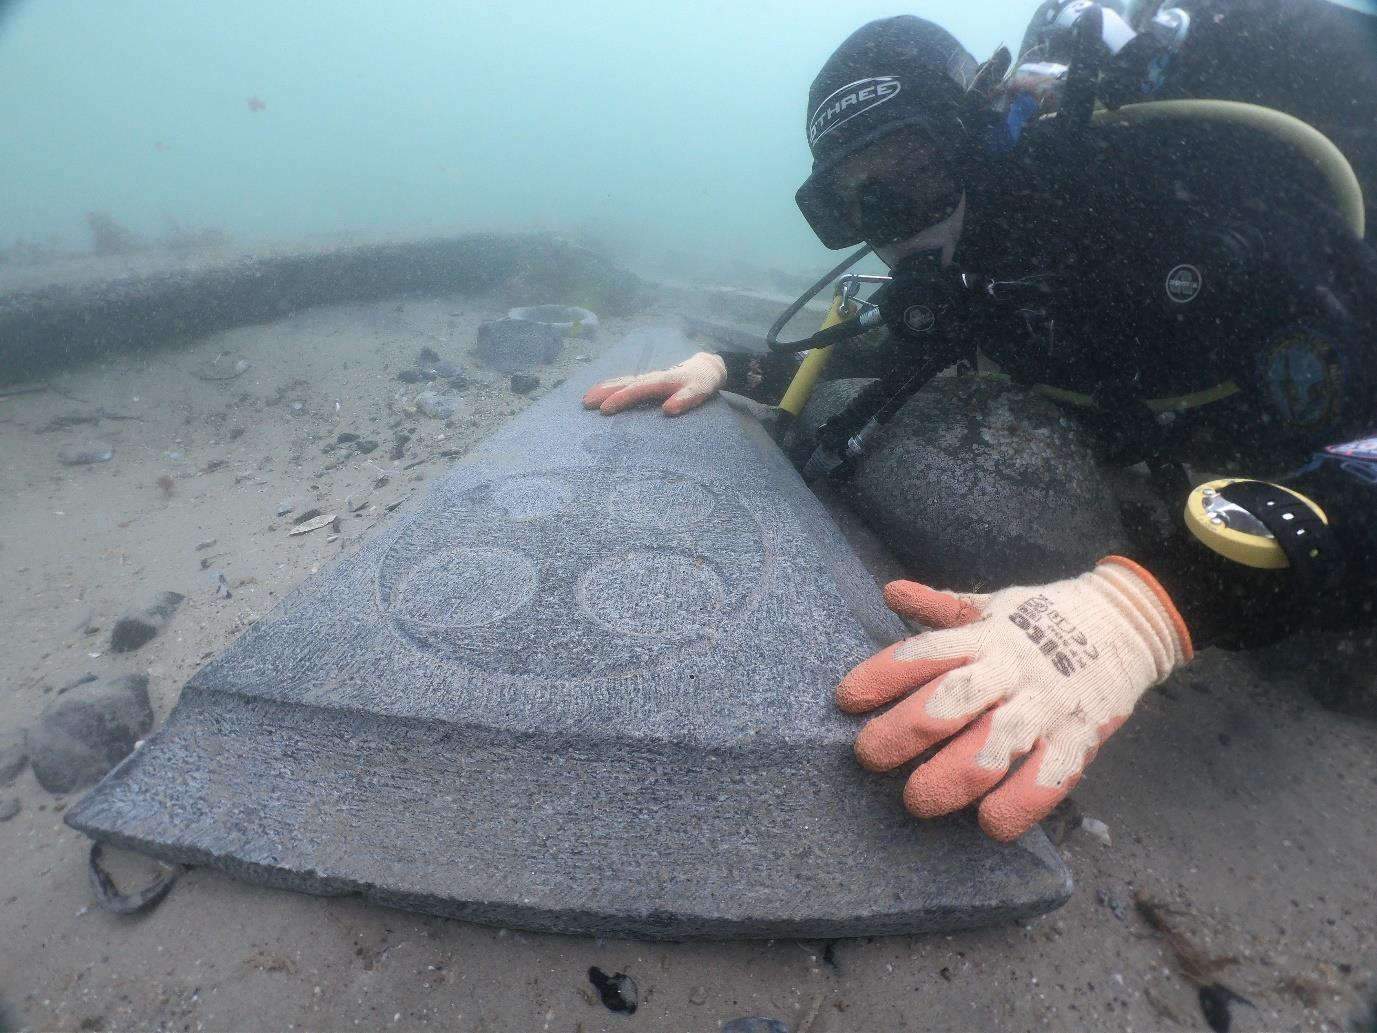 England, spectacular recovery in the sea: medieval slabs resurface from a wreck